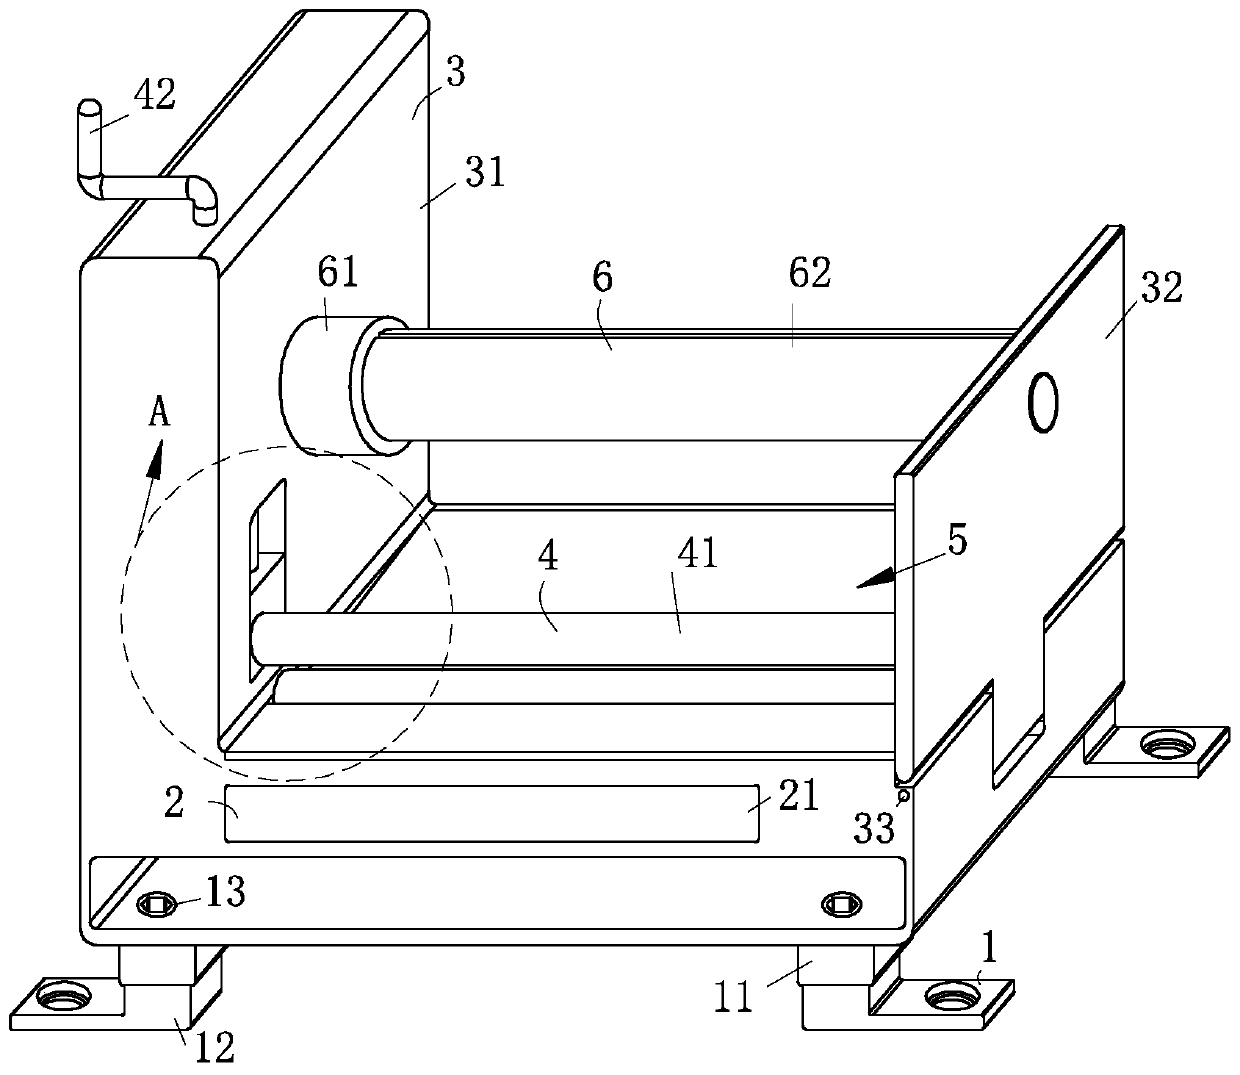 Secondary rolling equipment provided with dust removal assembly and used for scattered gauze